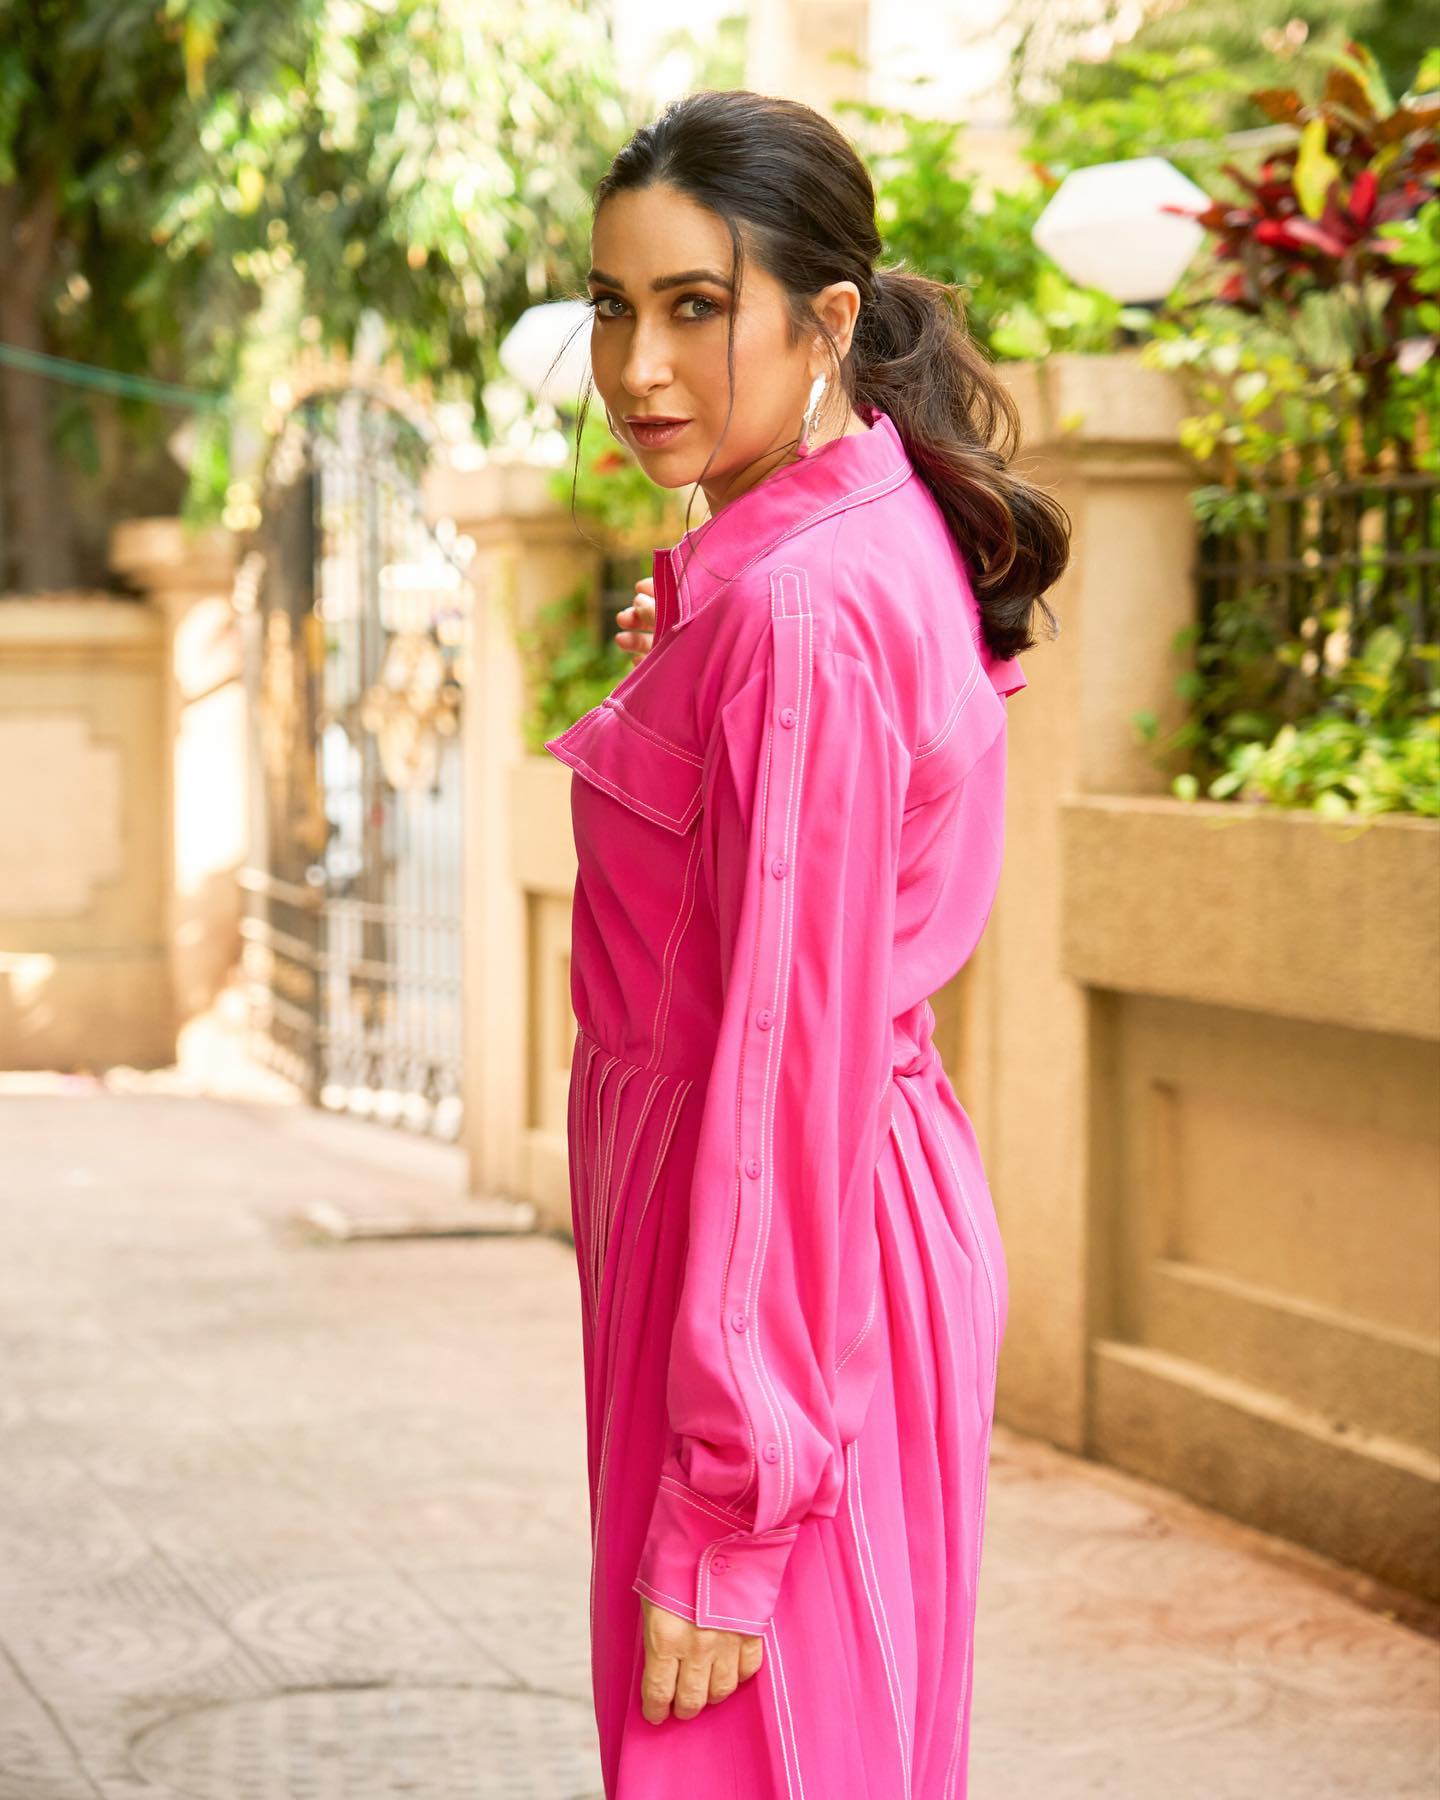 Karisma Kapoor is the queen of millions of hearts even at the age of 48, see her charming avatar 17298